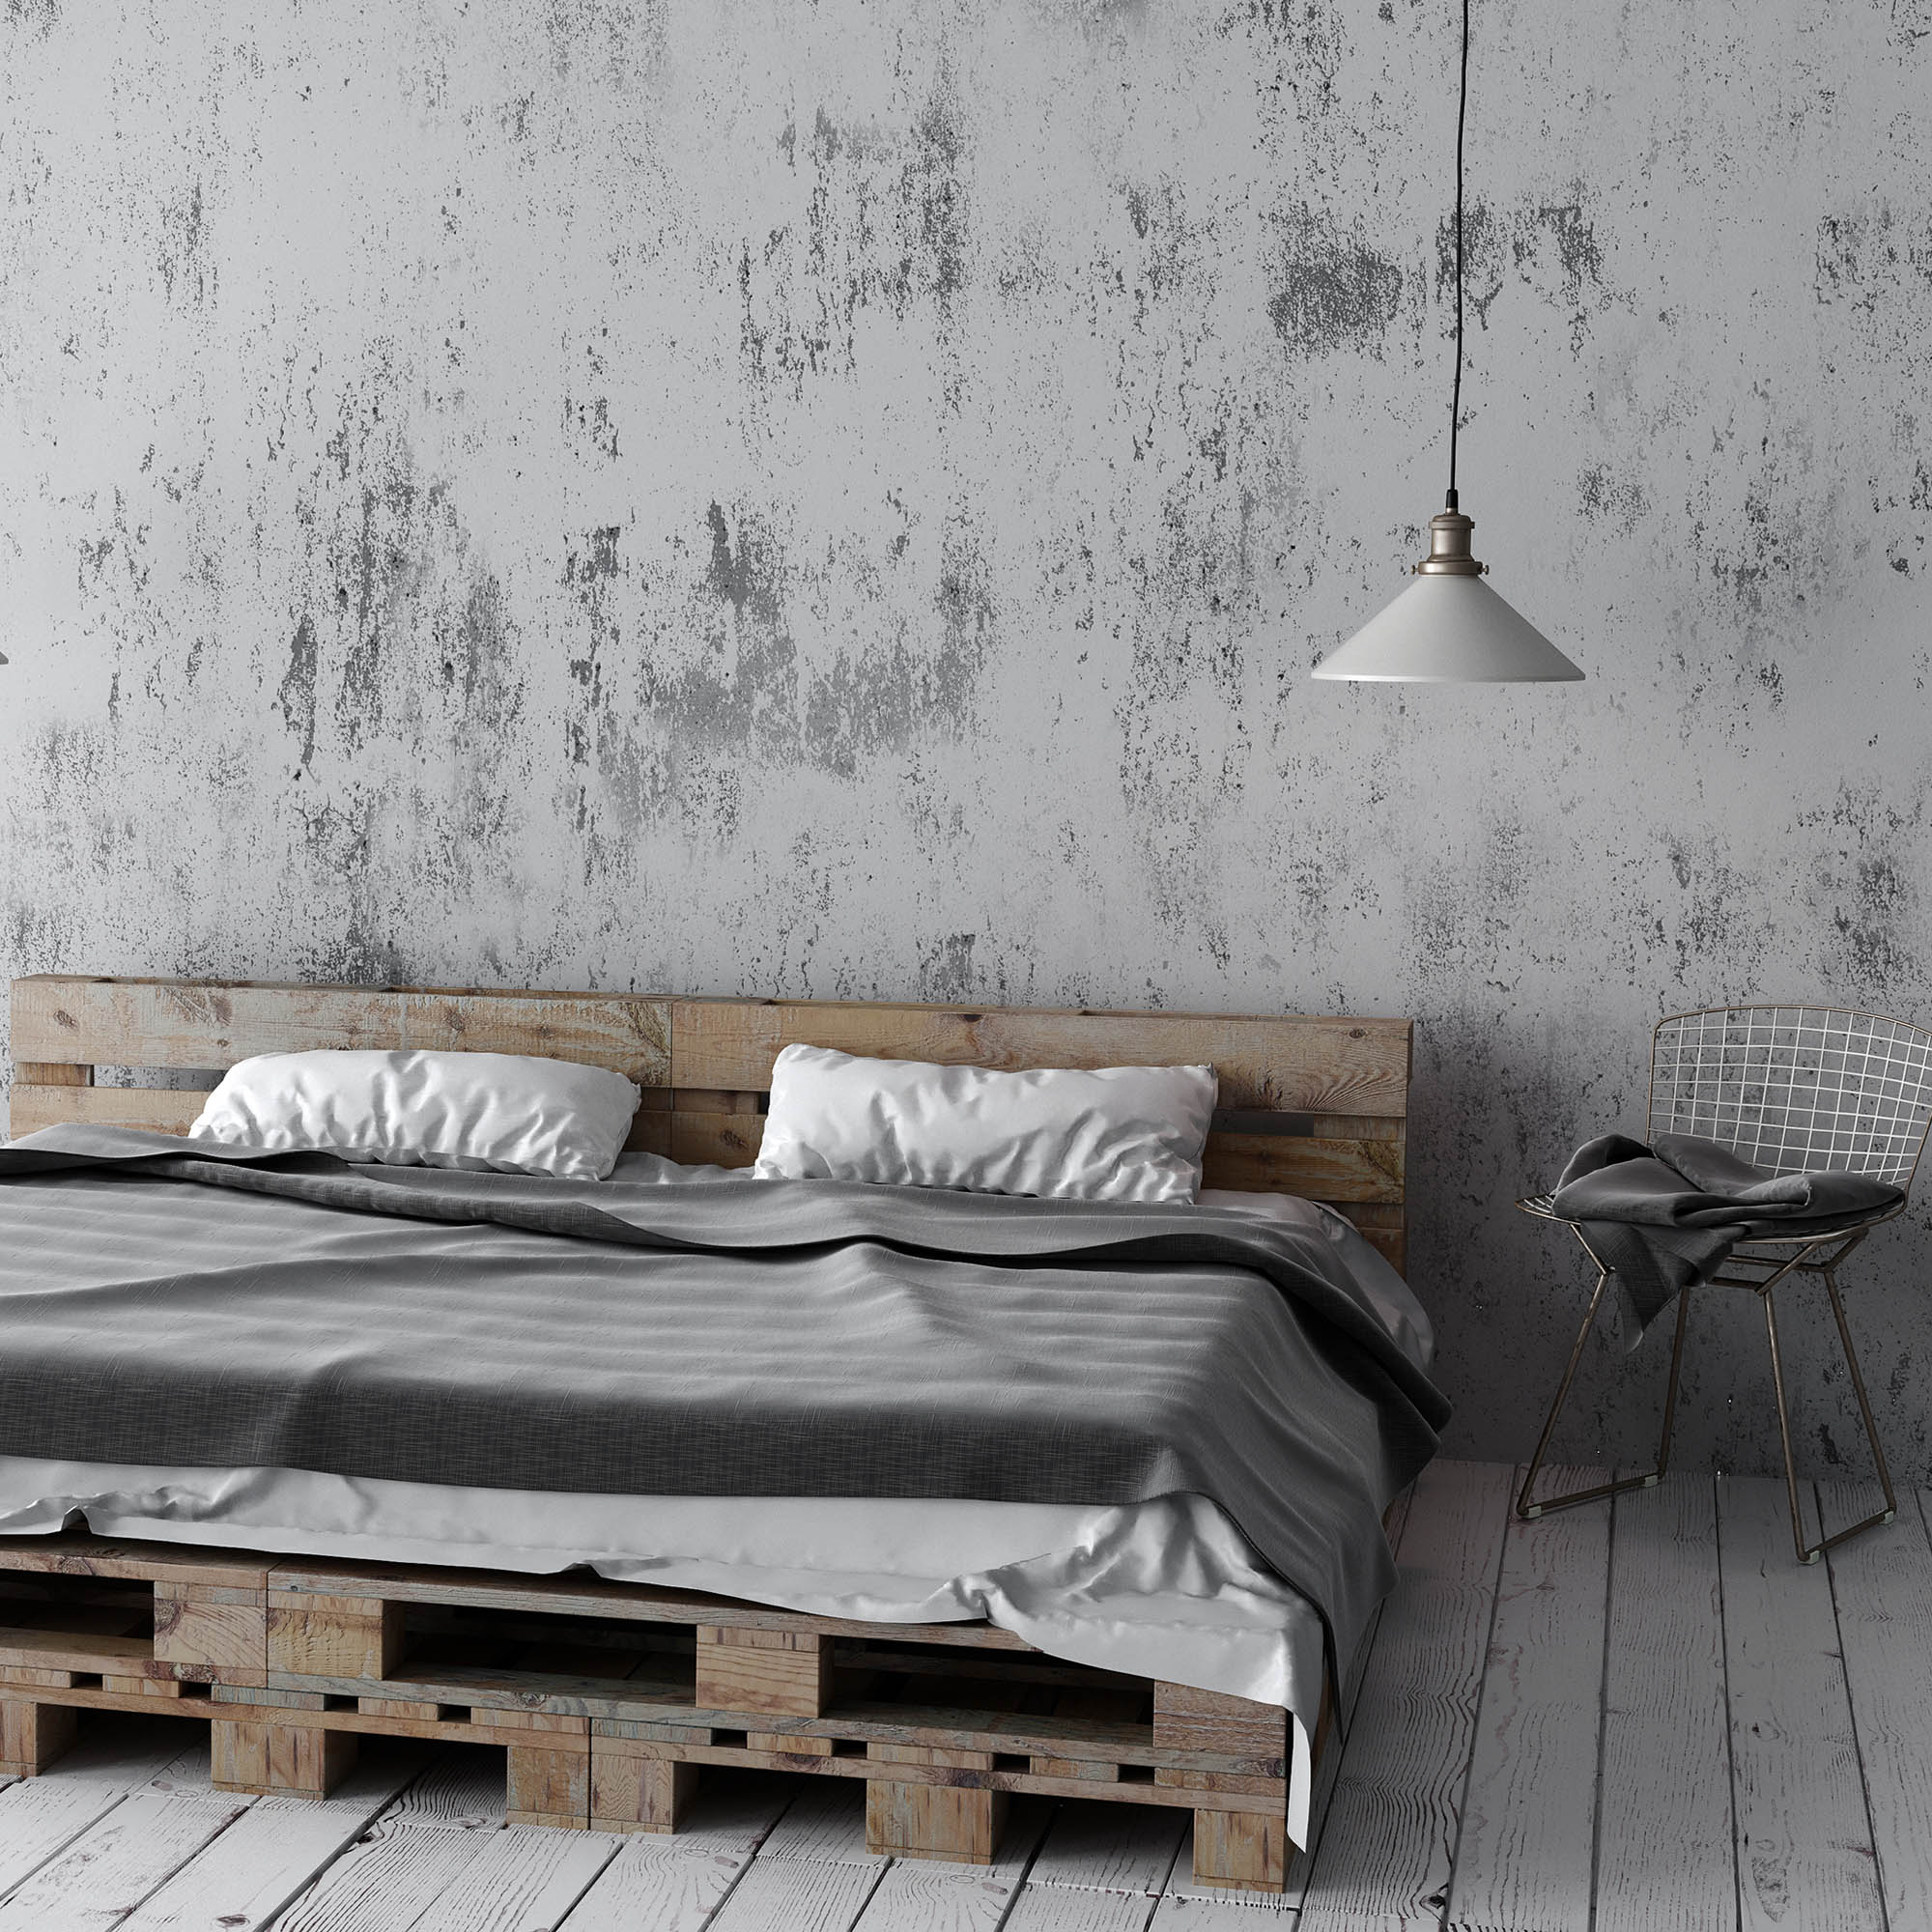 palletbed